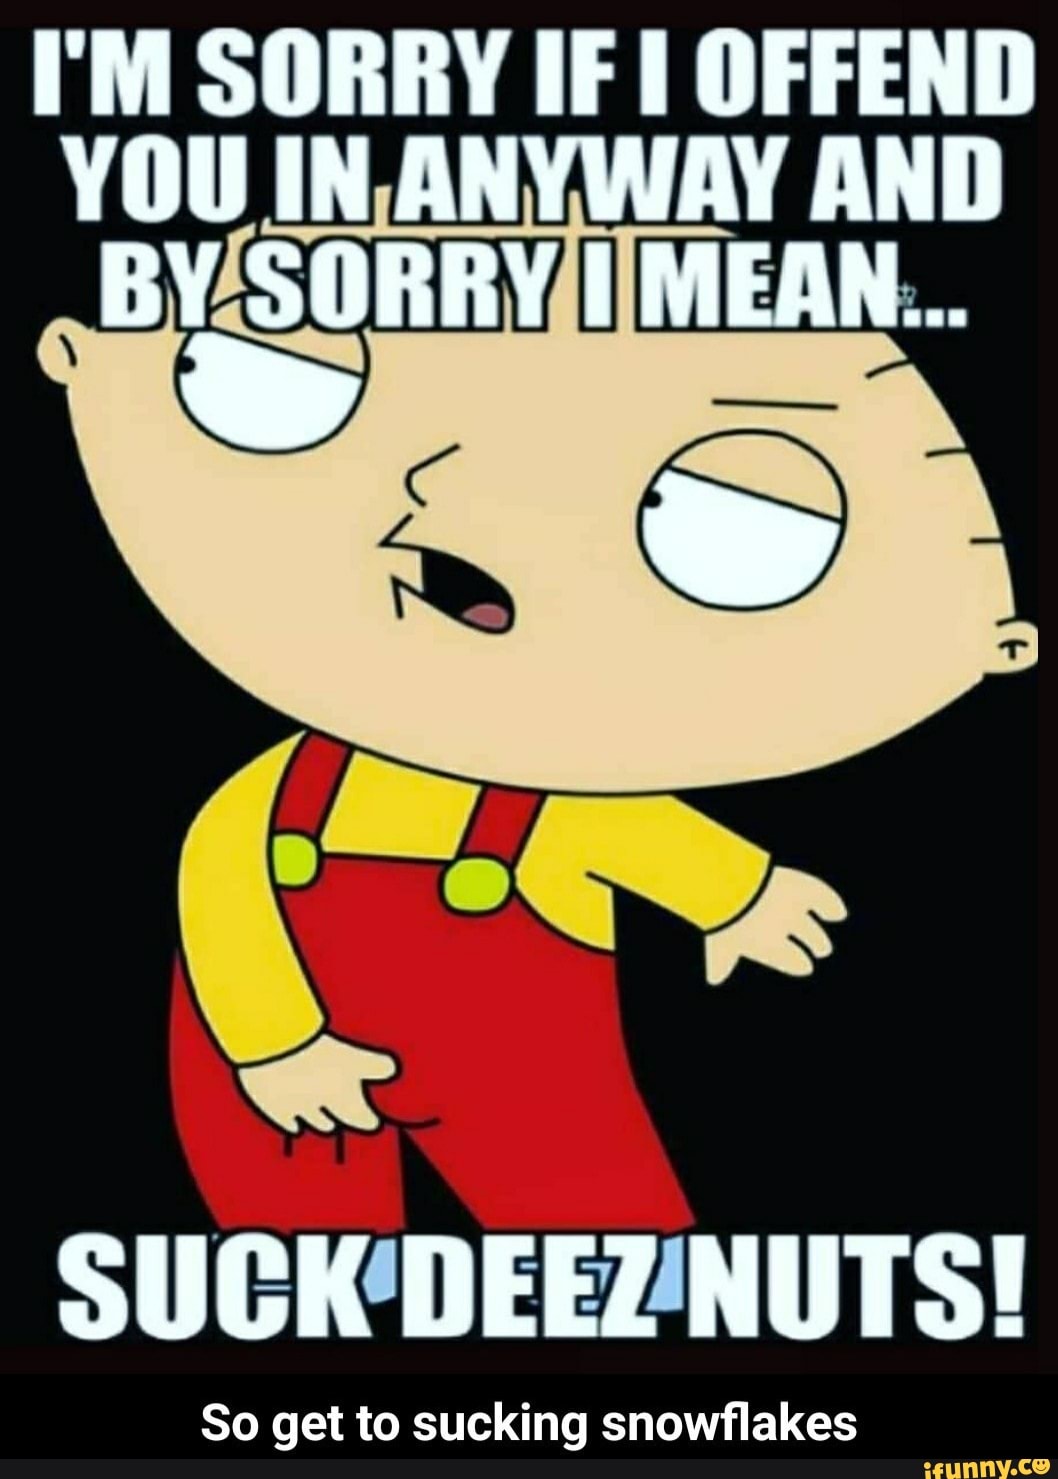 I M Sorry If Offend You In Anyway And By Sorry I Mean Suck Deez Nuts So Get To Sucking Snowflakes